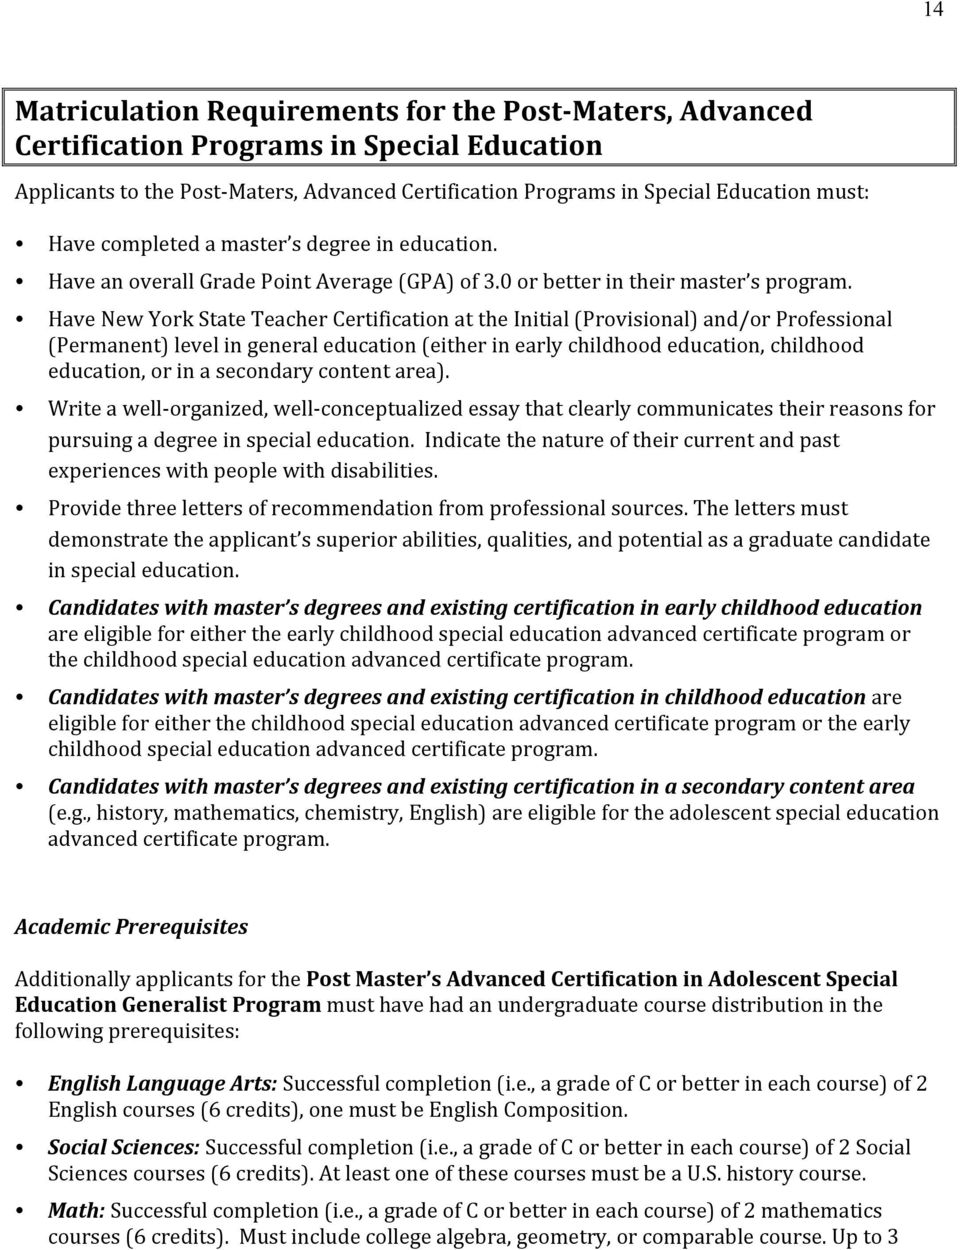 Have New York State Teacher Certification at the Initial (Provisional) and/or Professional (Permanent) level in general education (either in early childhood education, childhood education, or in a